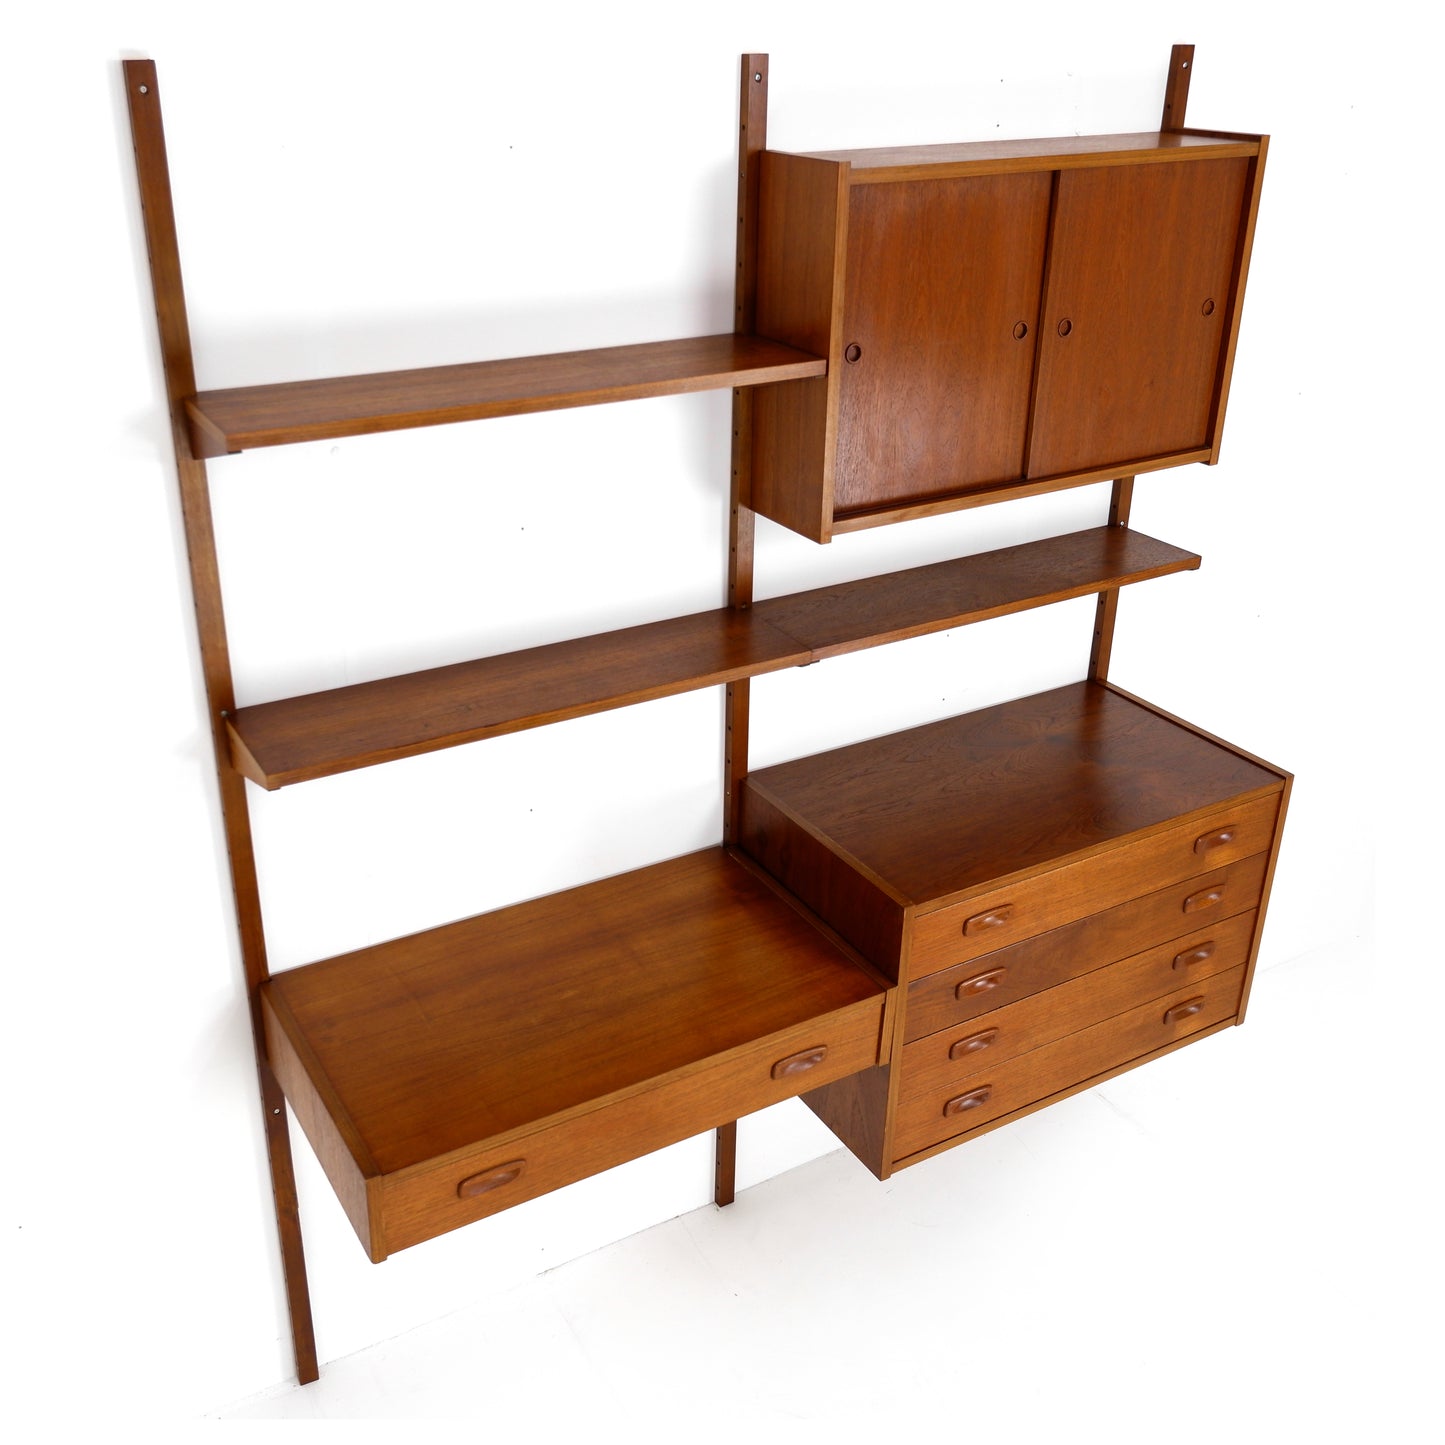 Danish Modern PS System Shelving Unit in Teak - Modular Desk and Cabinets with Bookcase Shelves